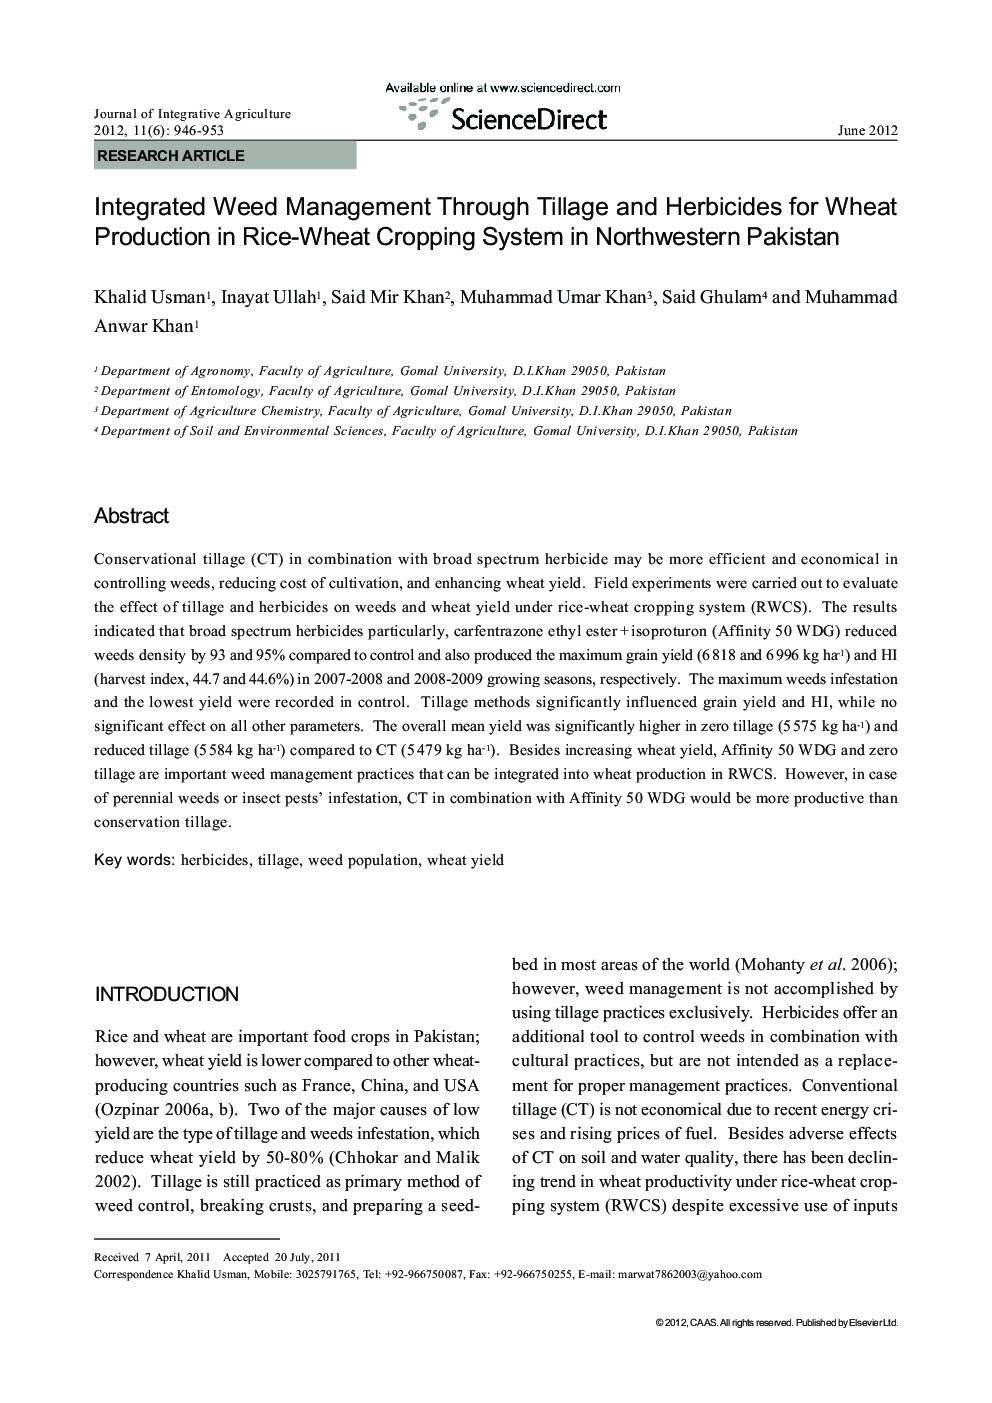 Integrated Weed Management Through Tillage and Herbicides for Wheat Production in Rice-Wheat Cropping System in Northwestern Pakistan